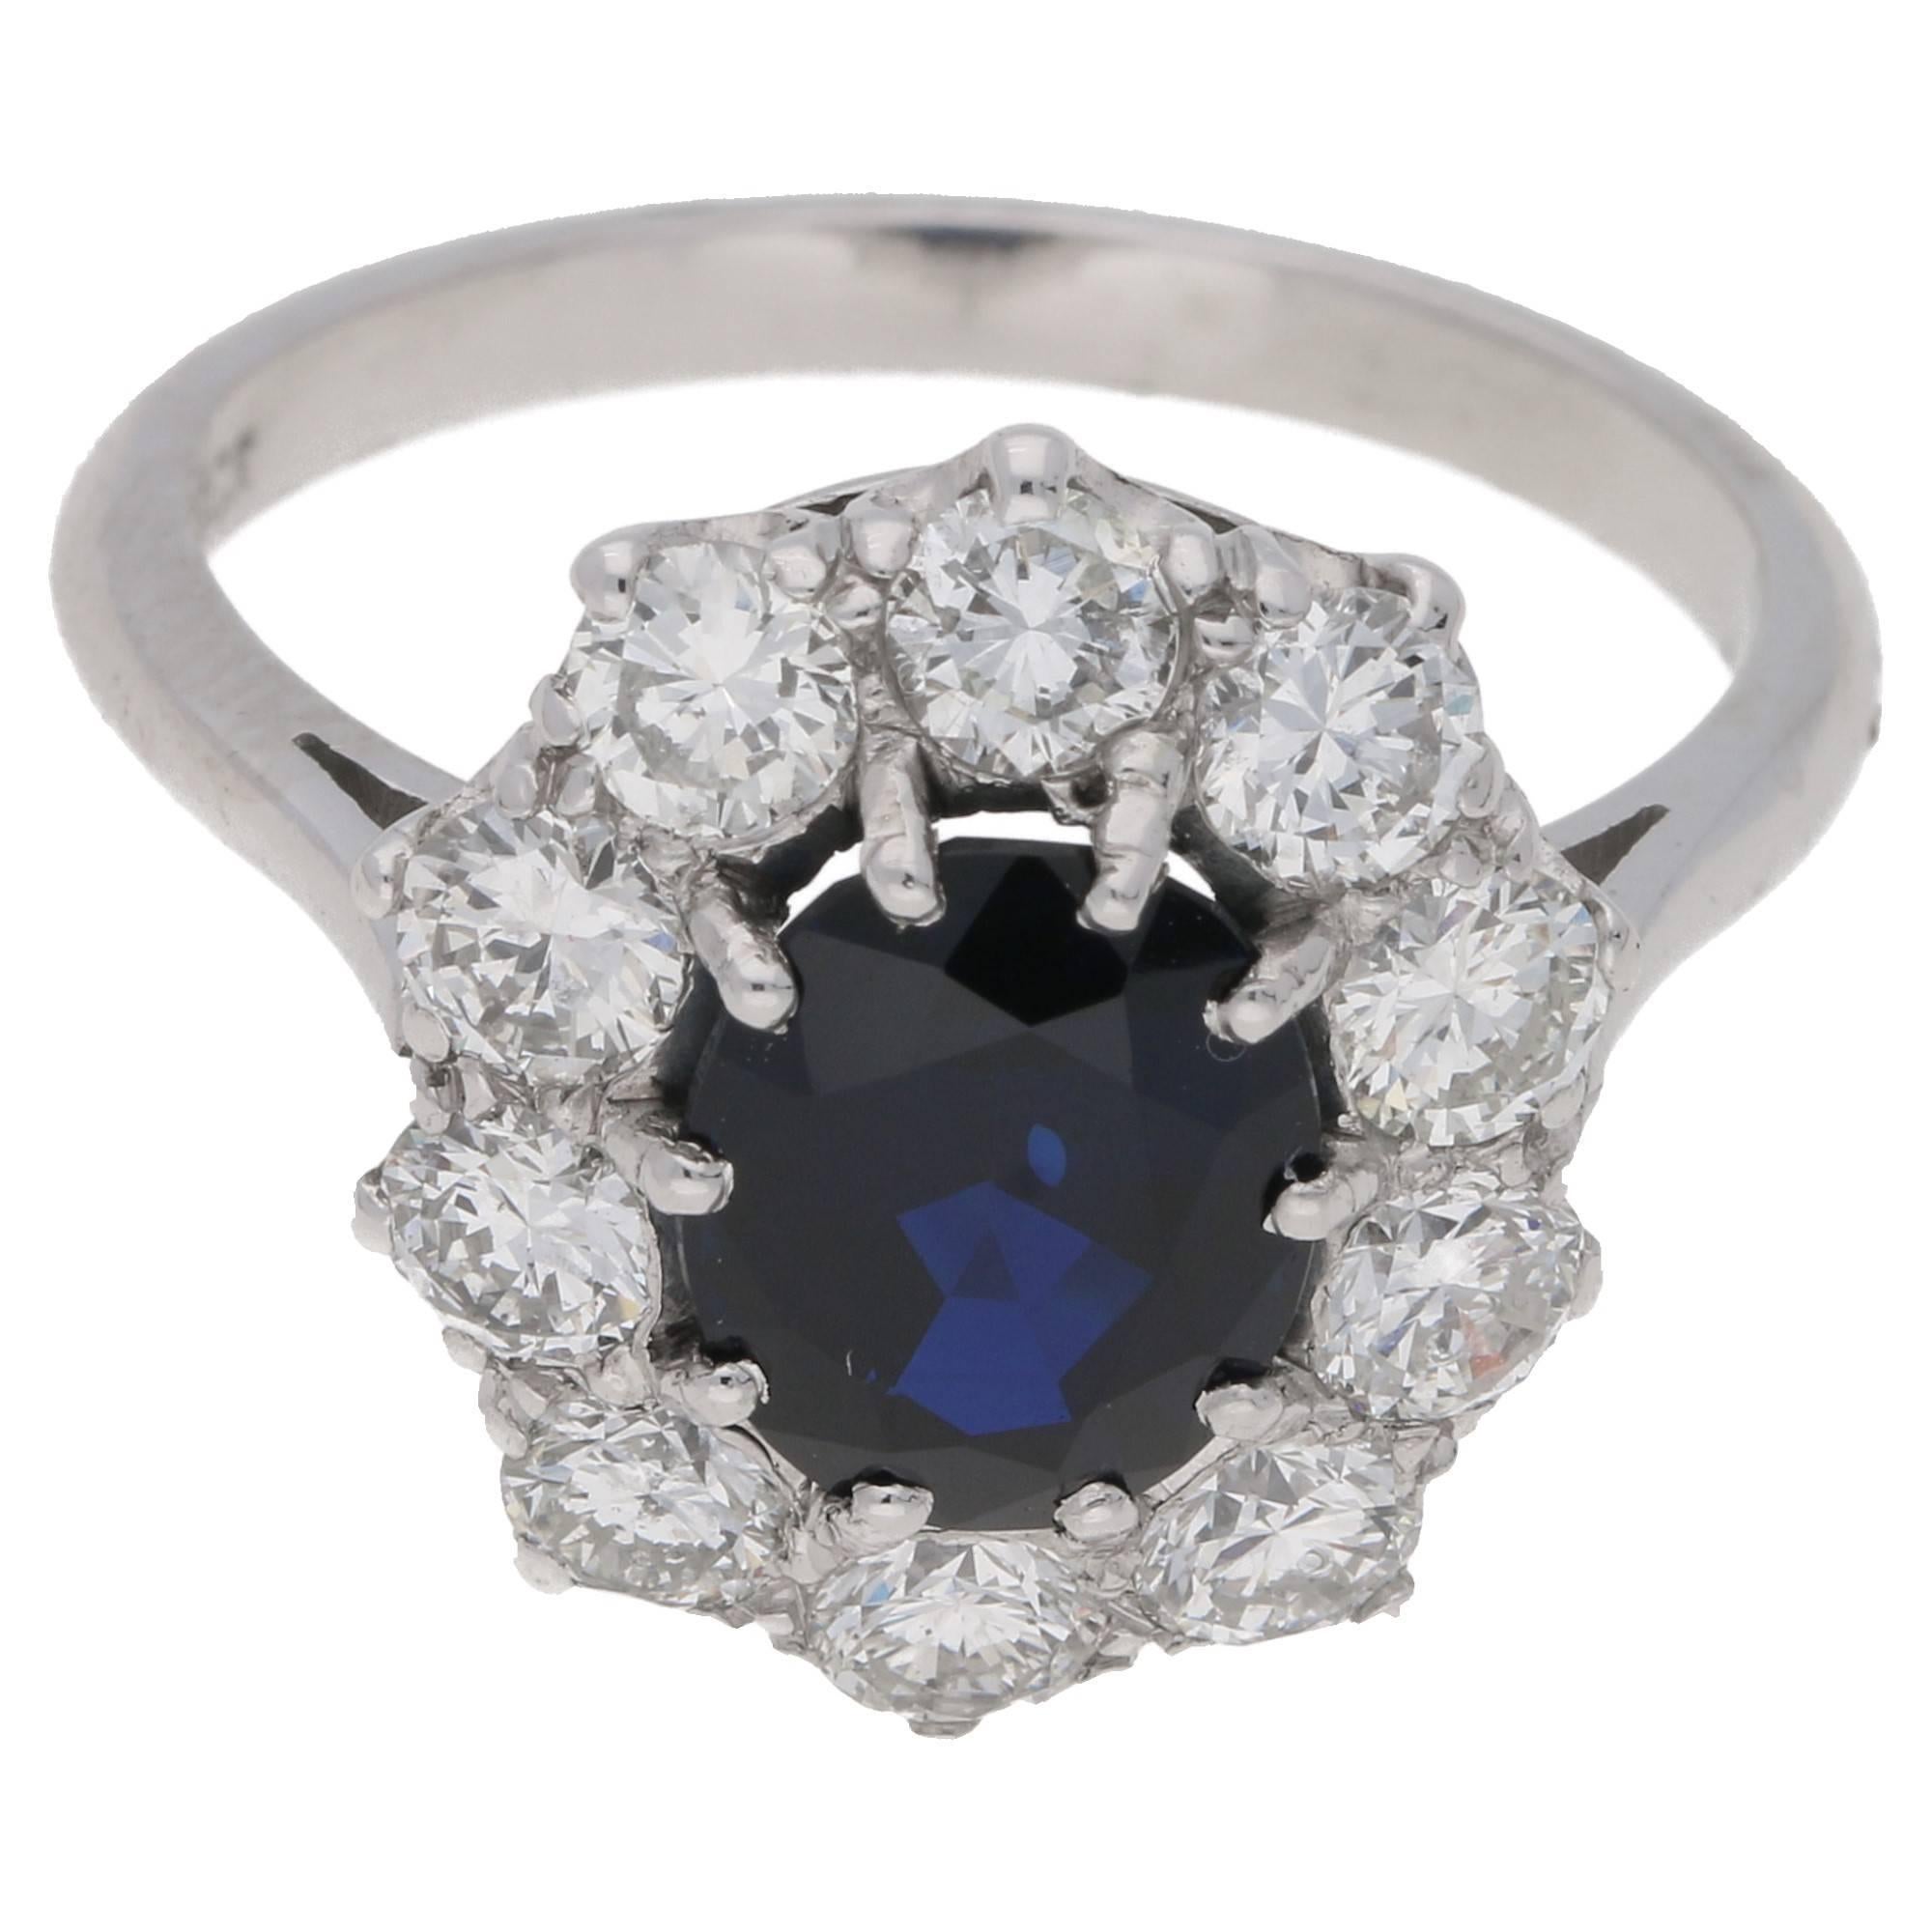 Estimated sapphire weight: 2.13cts. Estimated total diamond weight: 1.20cts. Assessed diamond colour: H. Assessed diamond clarity: VS.
A classic oval sapphire and diamond cluster ring set in 18ct white gold. 
The centrally set sapphire is ten claw